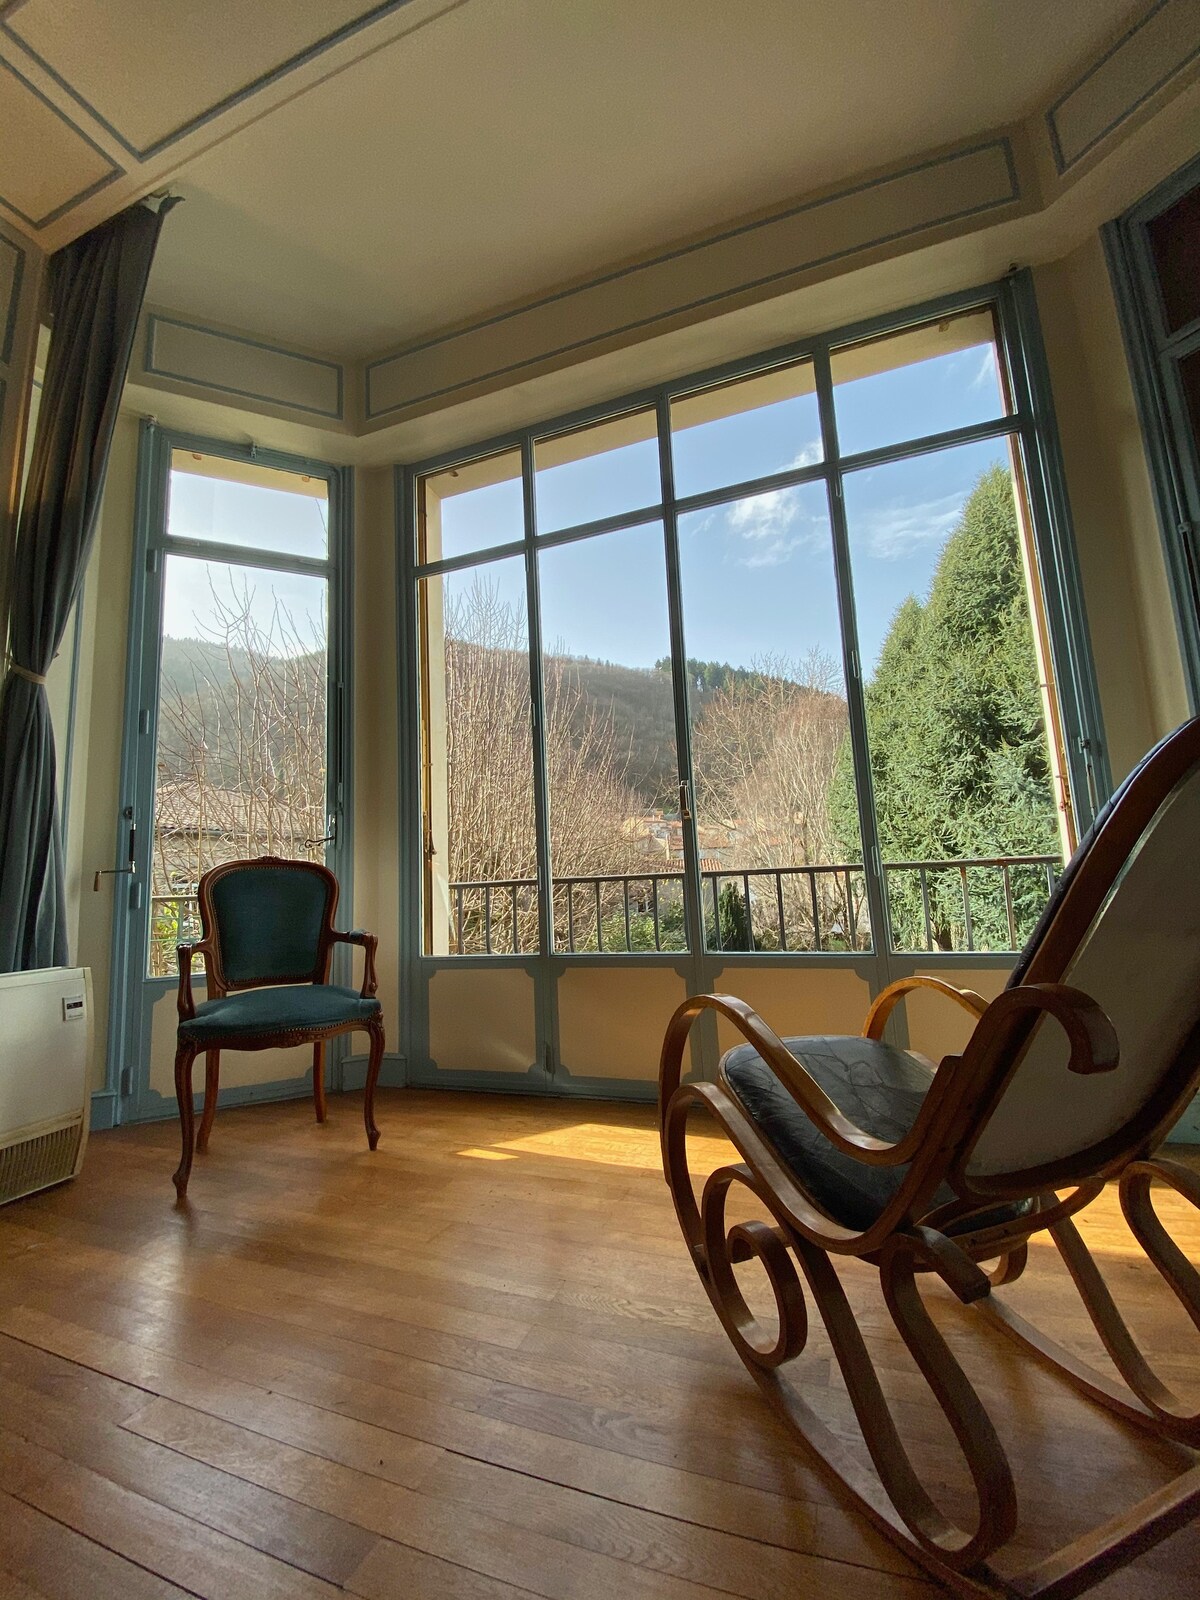 Beautiful character room with mountain view.